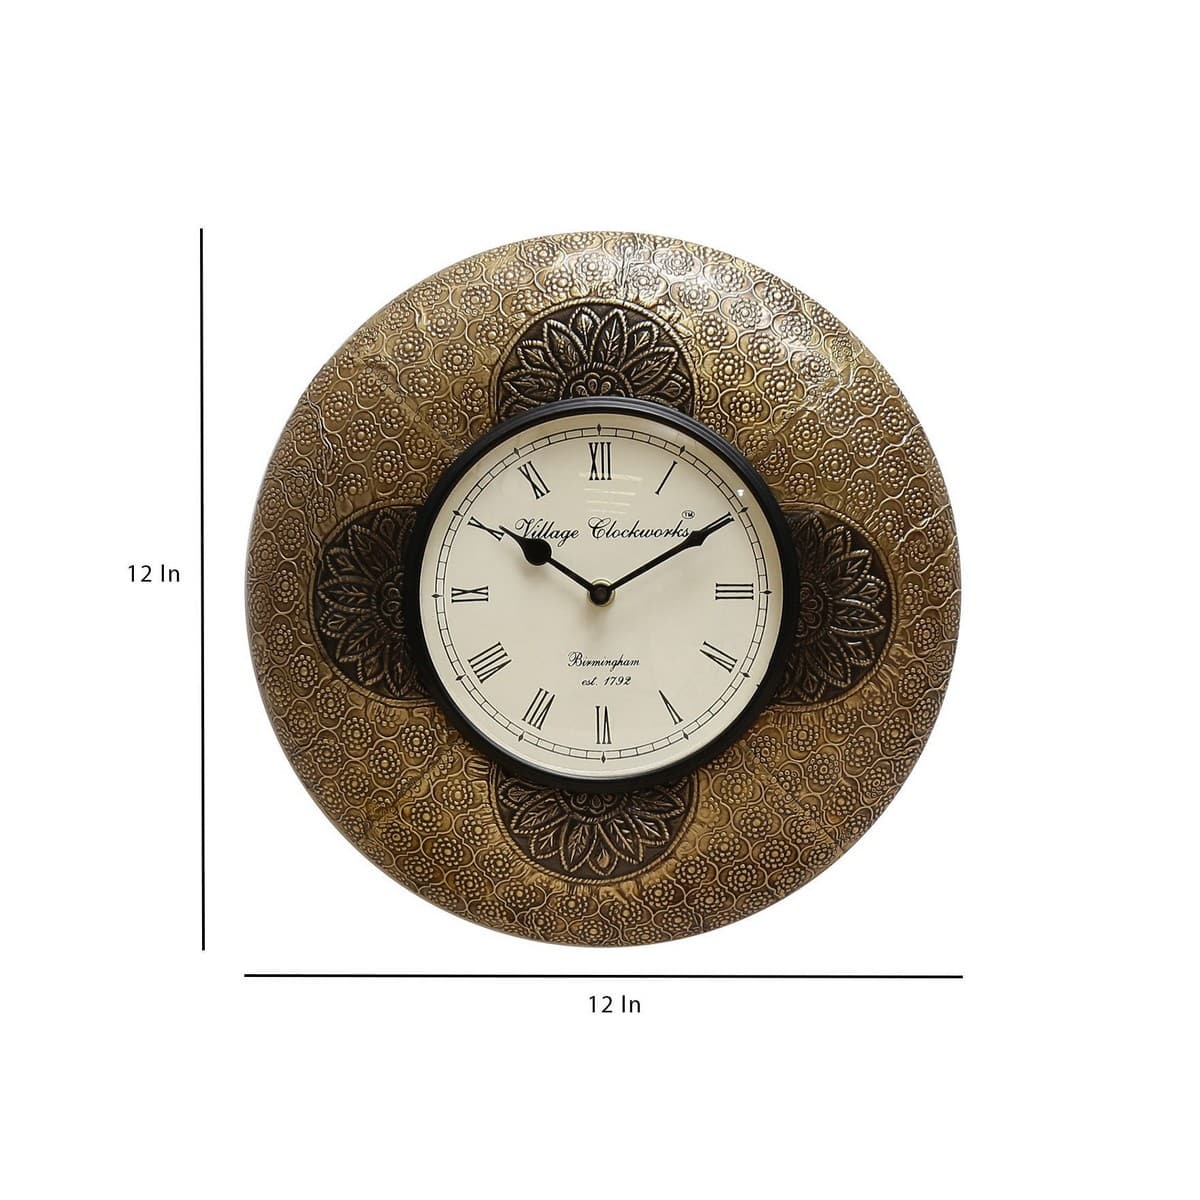 Highly Decorative Round Wall Clock in Golden  Brown Shade  